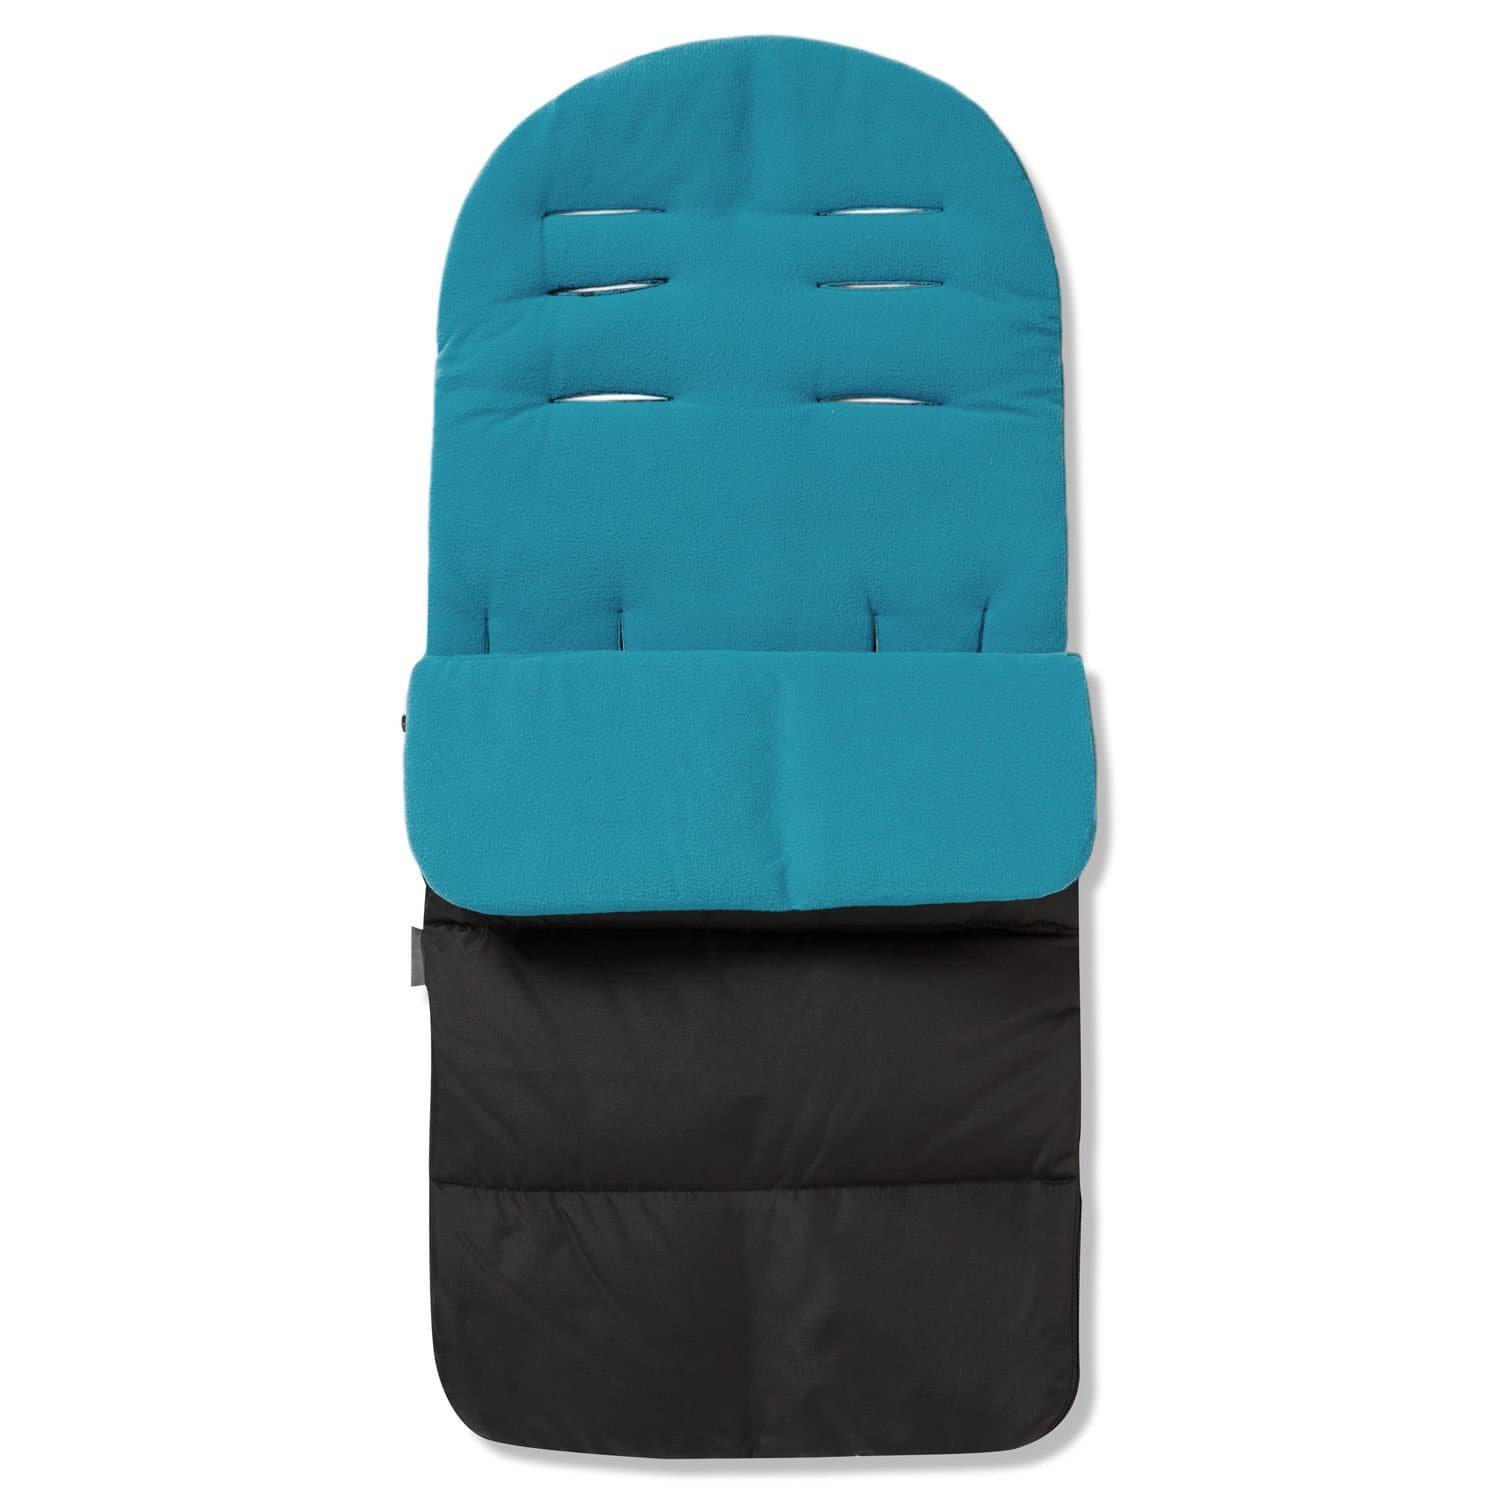 Premium Footmuff / Cosy Toes Compatible with Maclaren - Ocean Blue / Fits All Models | For Your Little One